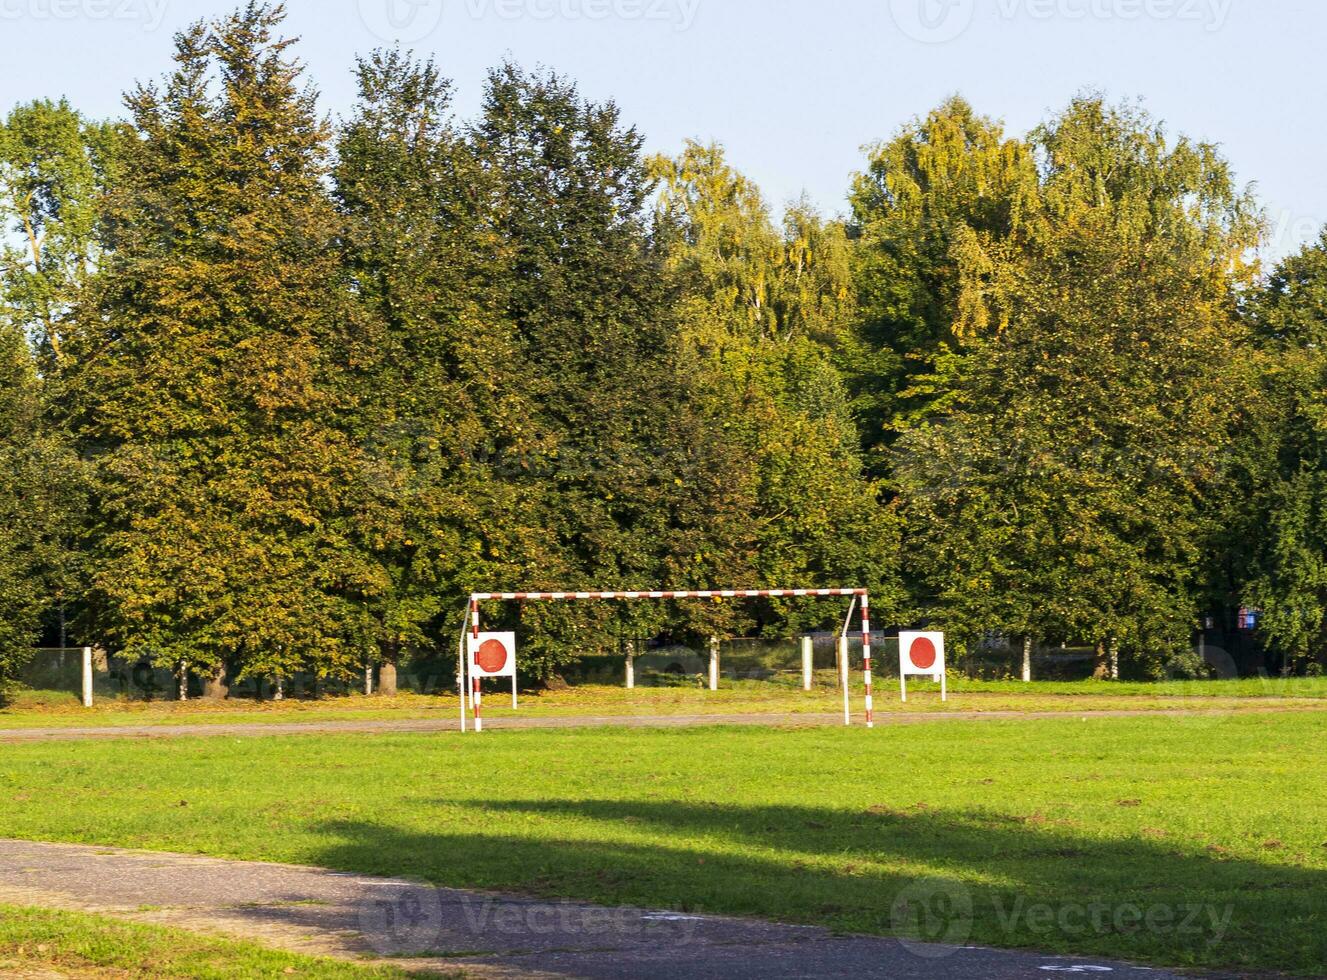 Shot of the football pitch in the park. City photo